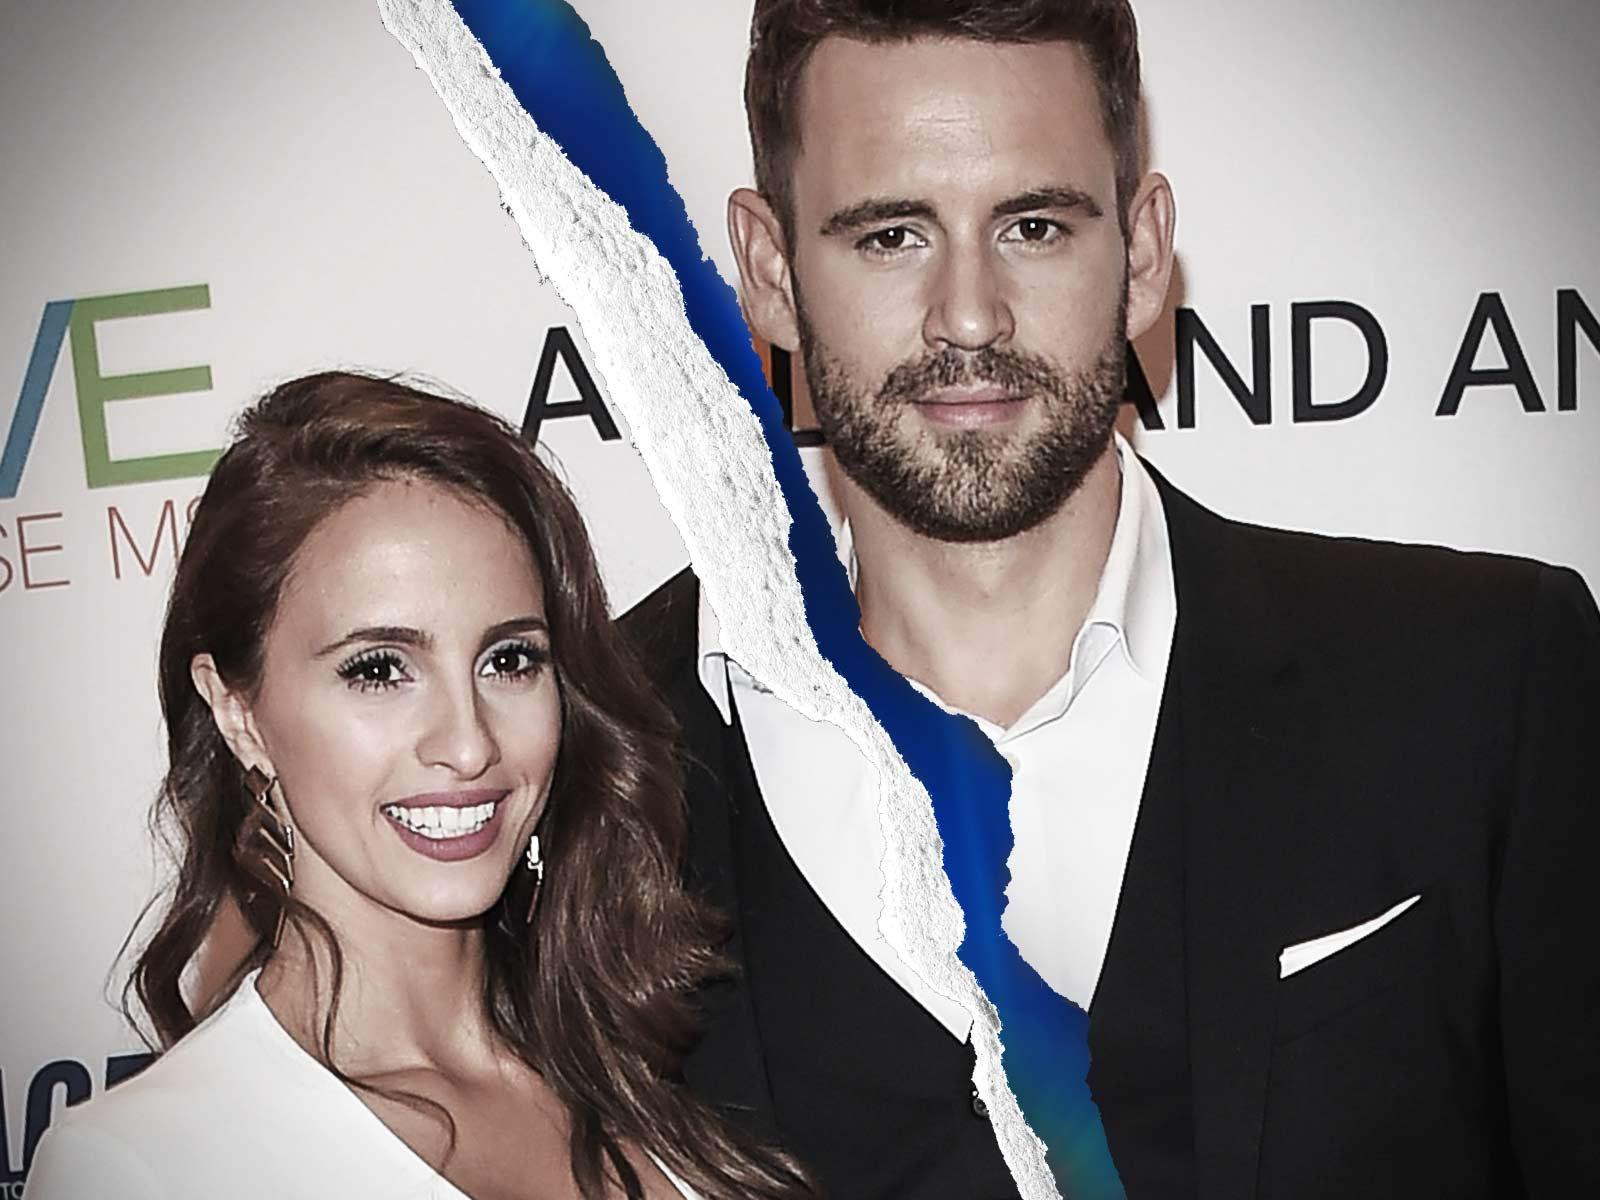 Another ‘Bachelor’ Couple Bites the Dust! Nick Viall and Fiancée Vanessa Grimaldi Break Up